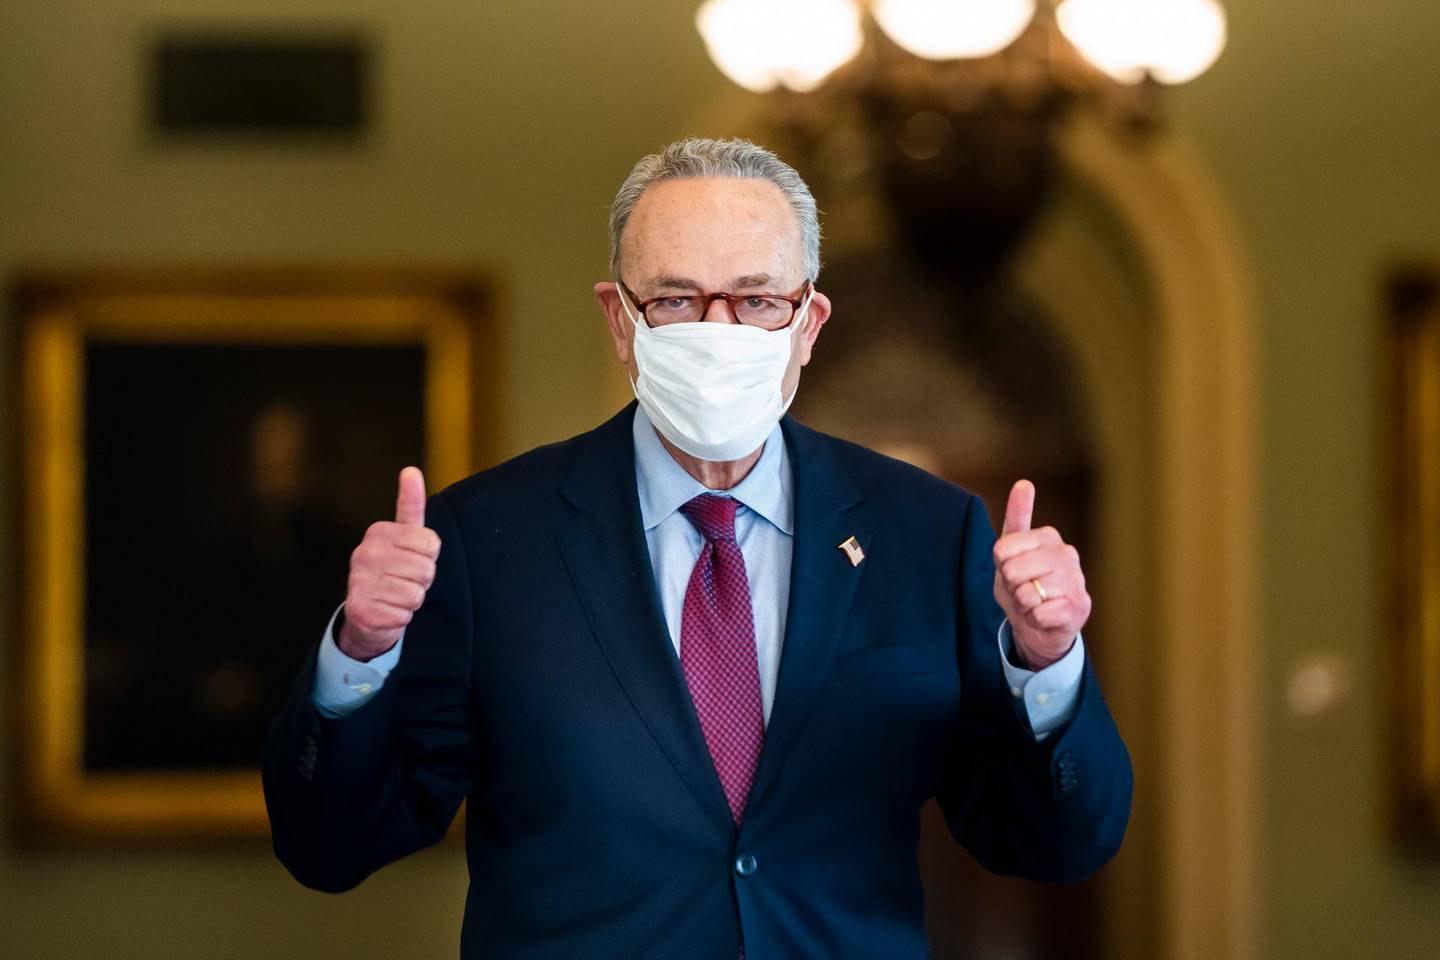 epa09057280 Democratic Senate Majority Leader Chuck Schumer gives a thumbs-up after the Senate voted to approve President Biden's Covid relief package in the US Capitol in Washington, DC, USA, 06 March 2021.  EPA/JIM LO SCALZO